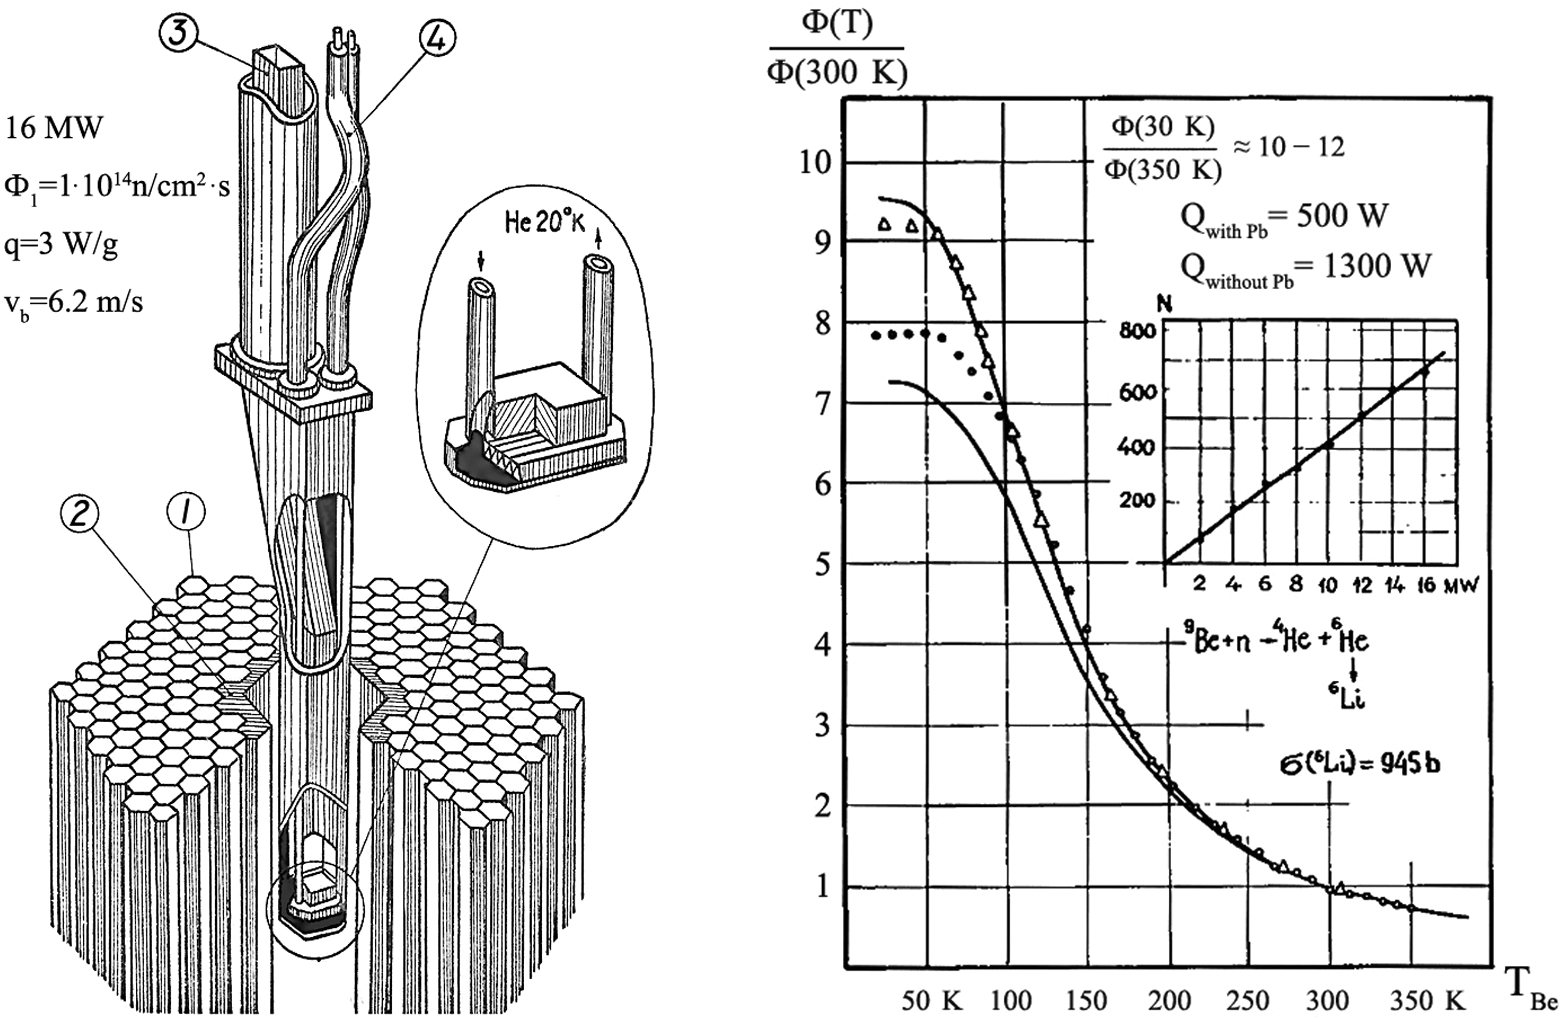 Cold beryllium UCN source at the WWR-M reactor. Left: artistic view of the central channel with the cooled UCN source in the reactor core (1 – fuel elements; 2 – lead shield; 3 – neutron guide mirrors; 4 – cryogenic pipes). Right: dependence of the UCN flux on the temperature of the beryllium converter (open and closed symbols refer to experimental results measured at two different channels. The solid curves represent simulations indicating the range of values for different samples of melted beryllium tested by transmission of UCN. Values of the heat load Q at 16 MW reactor power are given for source configurations with and without the lead shield.